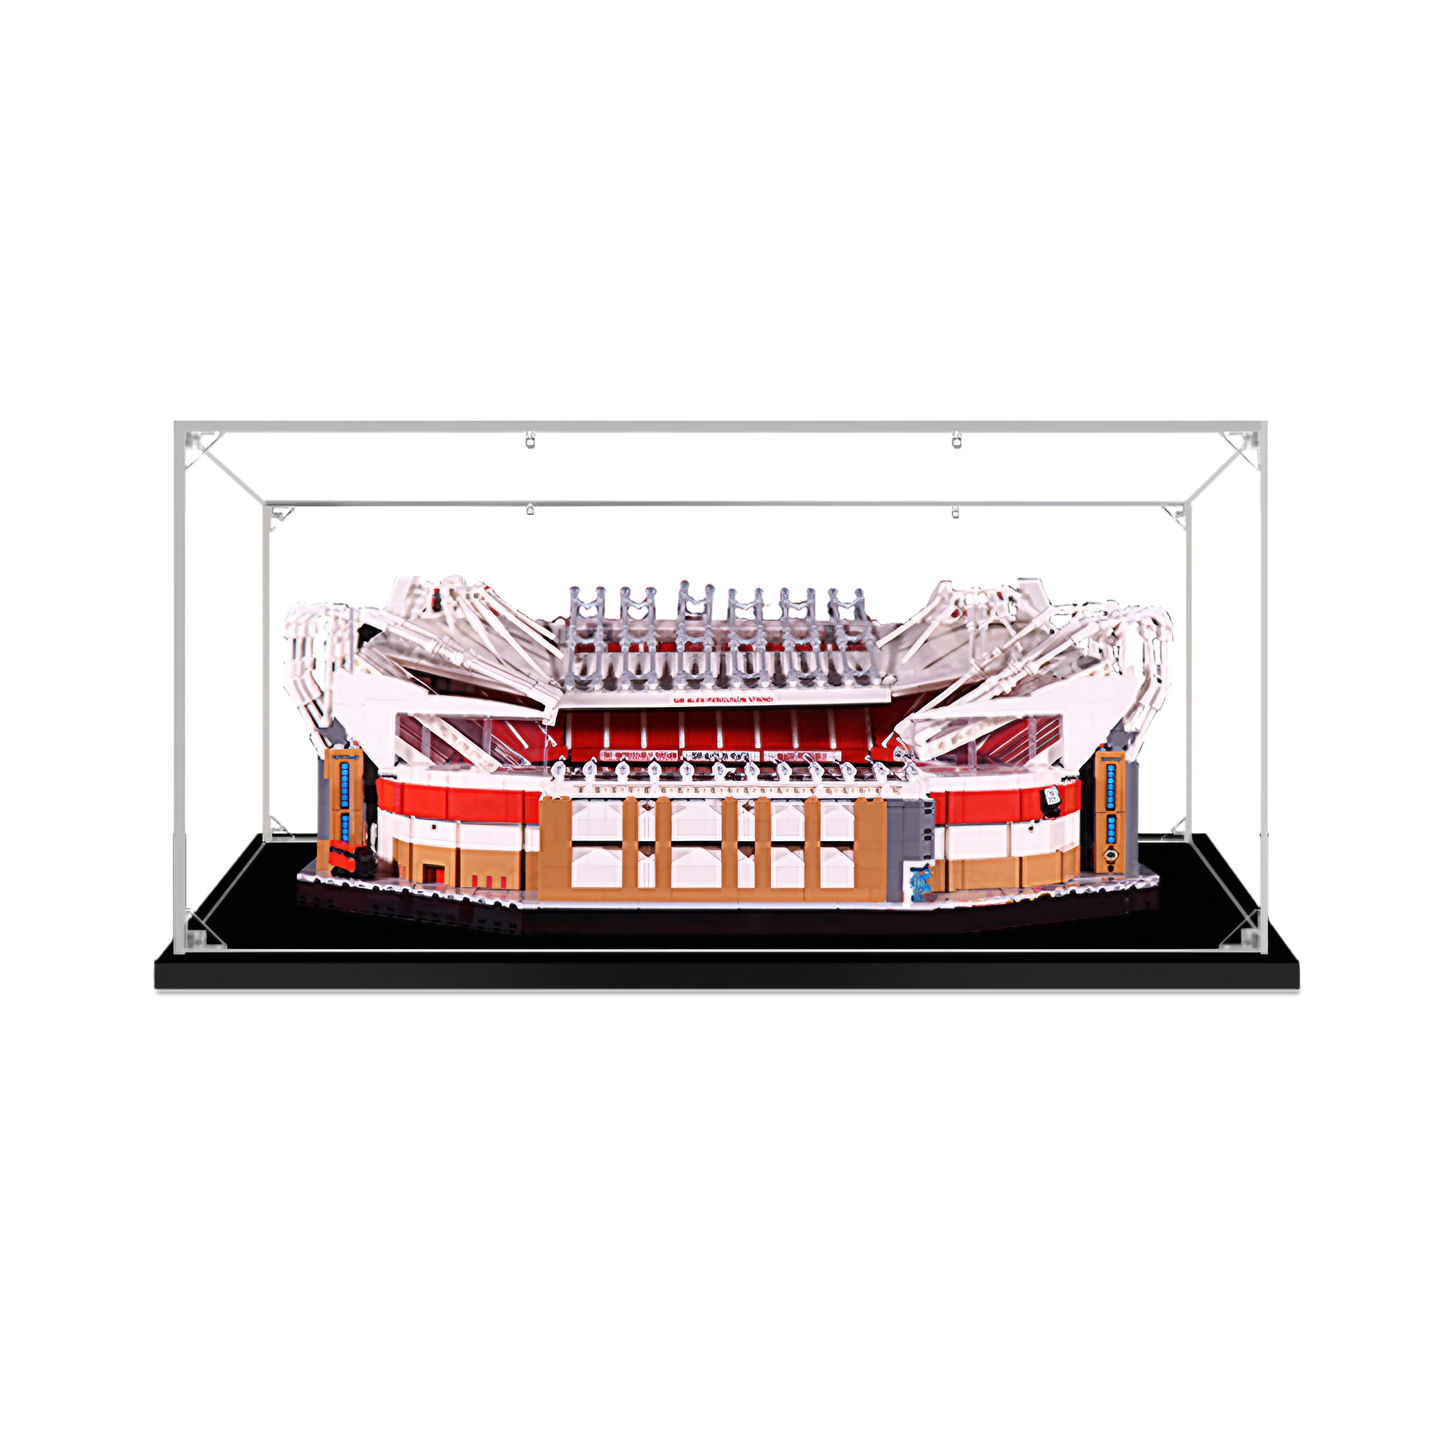 Acrylic Display Case for LEGO® Old Trafford - Manchester United 10272